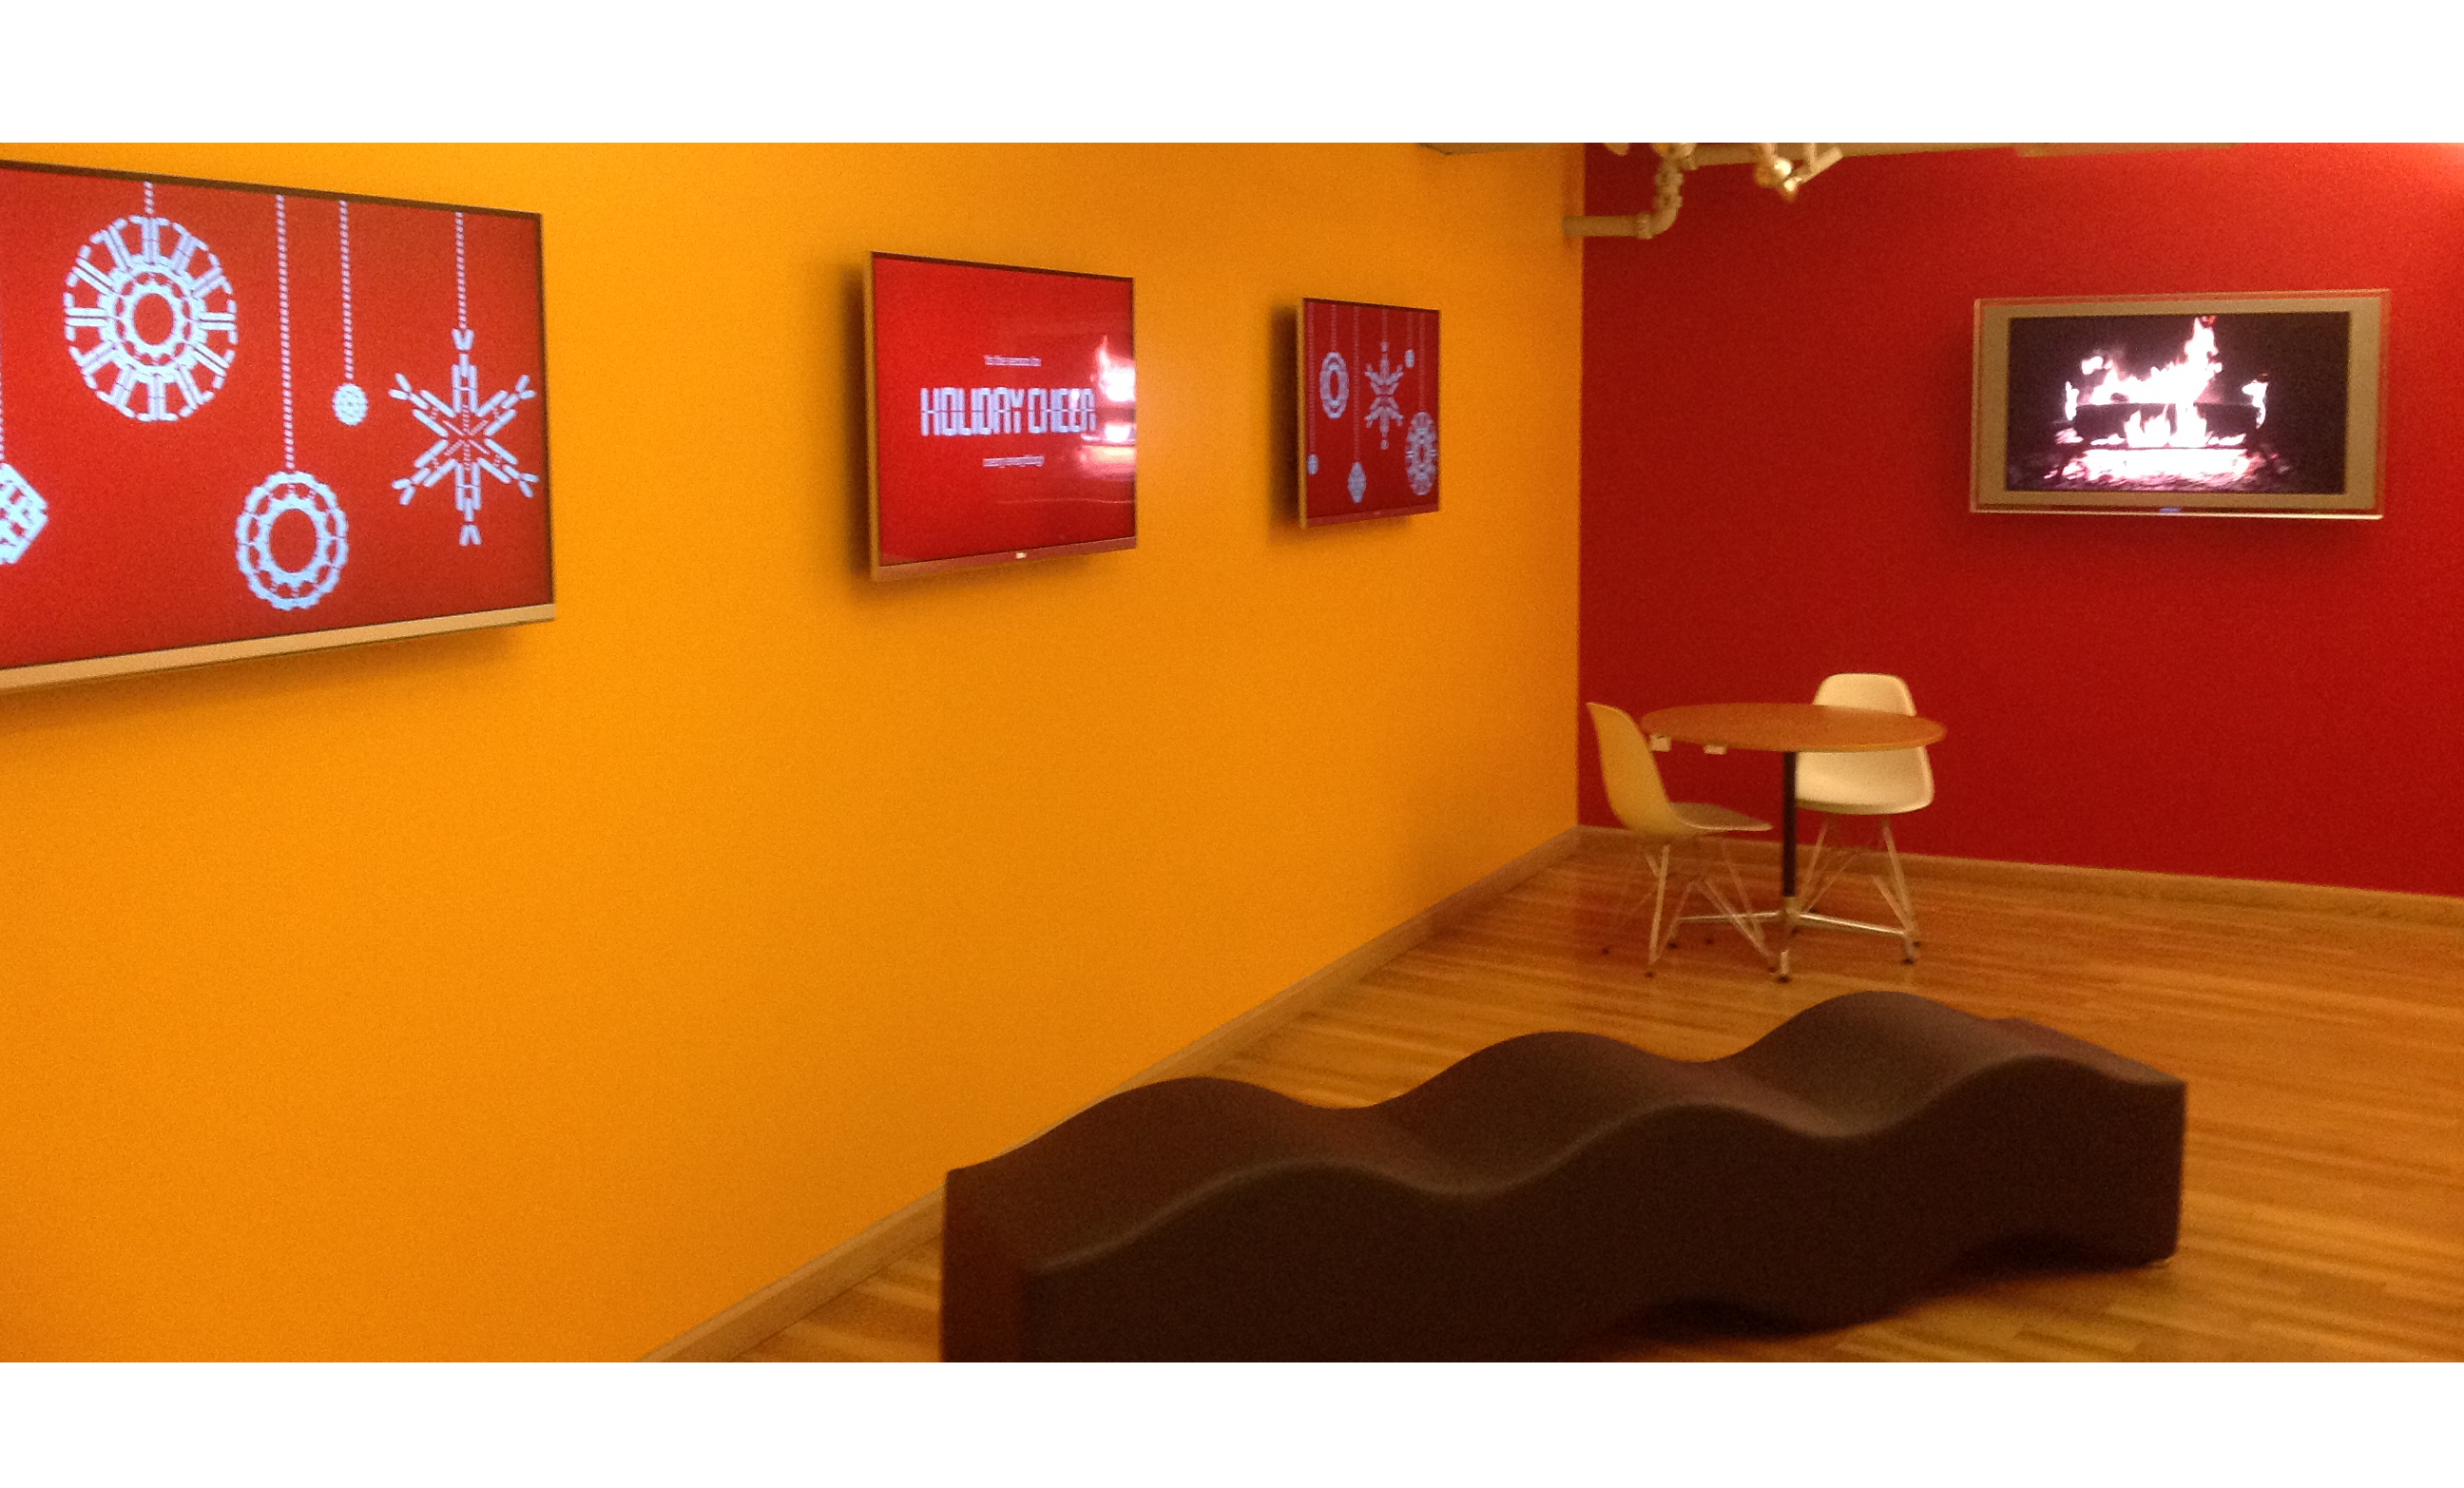 exhibition gallery with yellow wall and tv's with red images on them